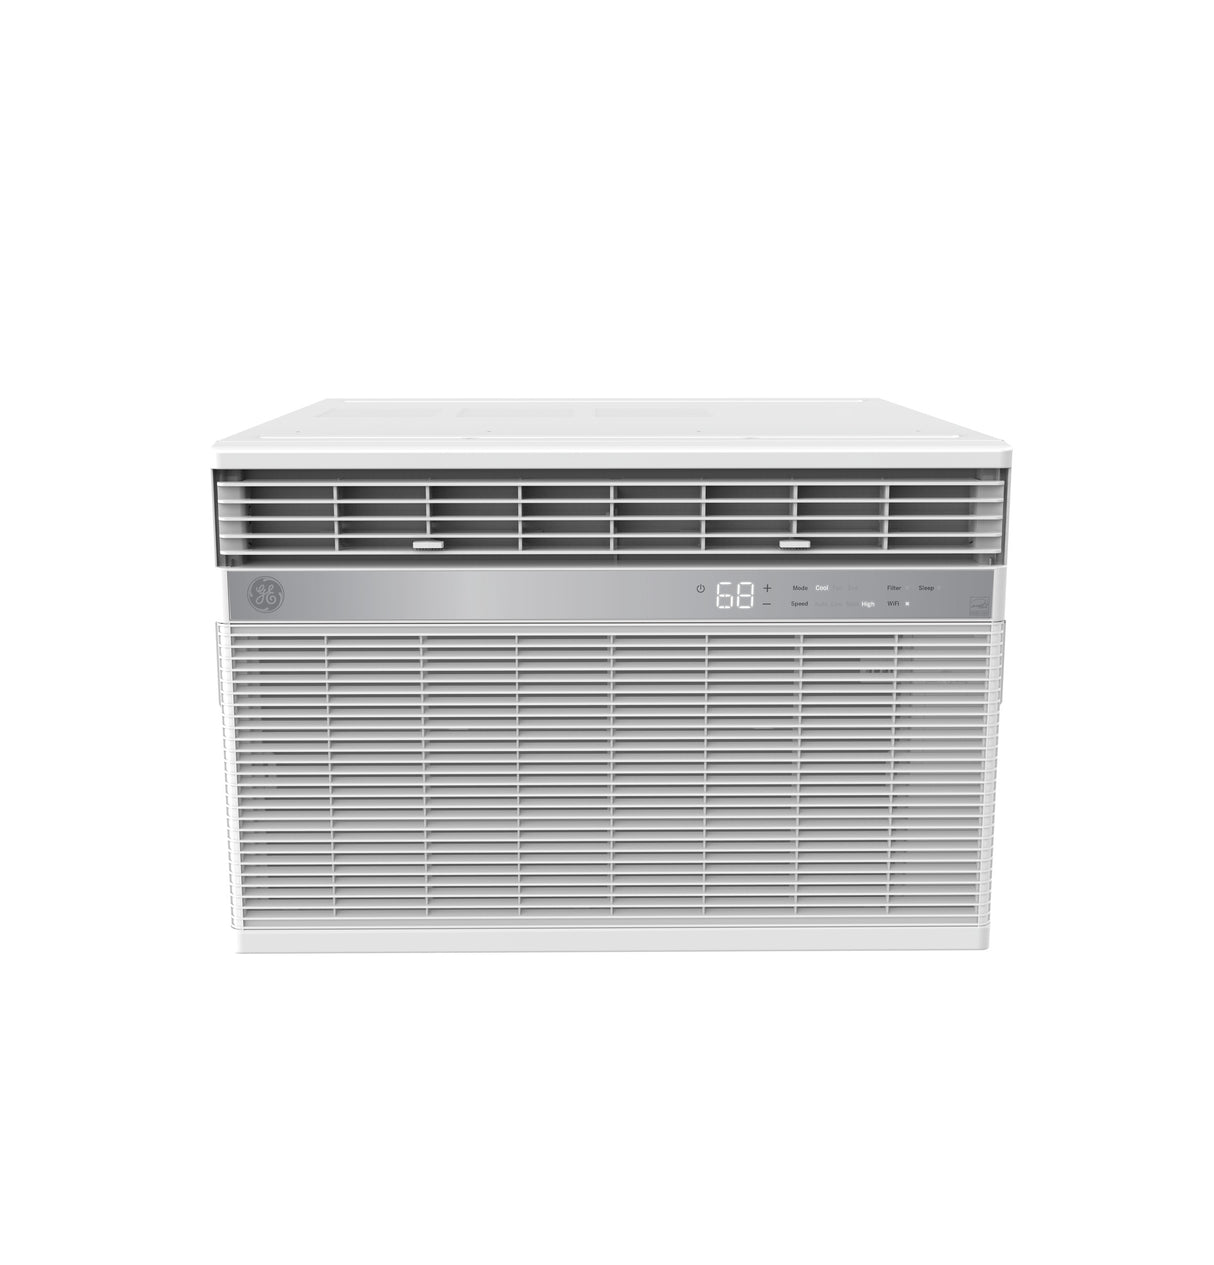 GE(R) ENERGY STAR(R) 18,000 BTU Smart Electronic Window Air Conditioner for Extra-Large Rooms up to 1000 sq. ft. - (AHFK18AA)